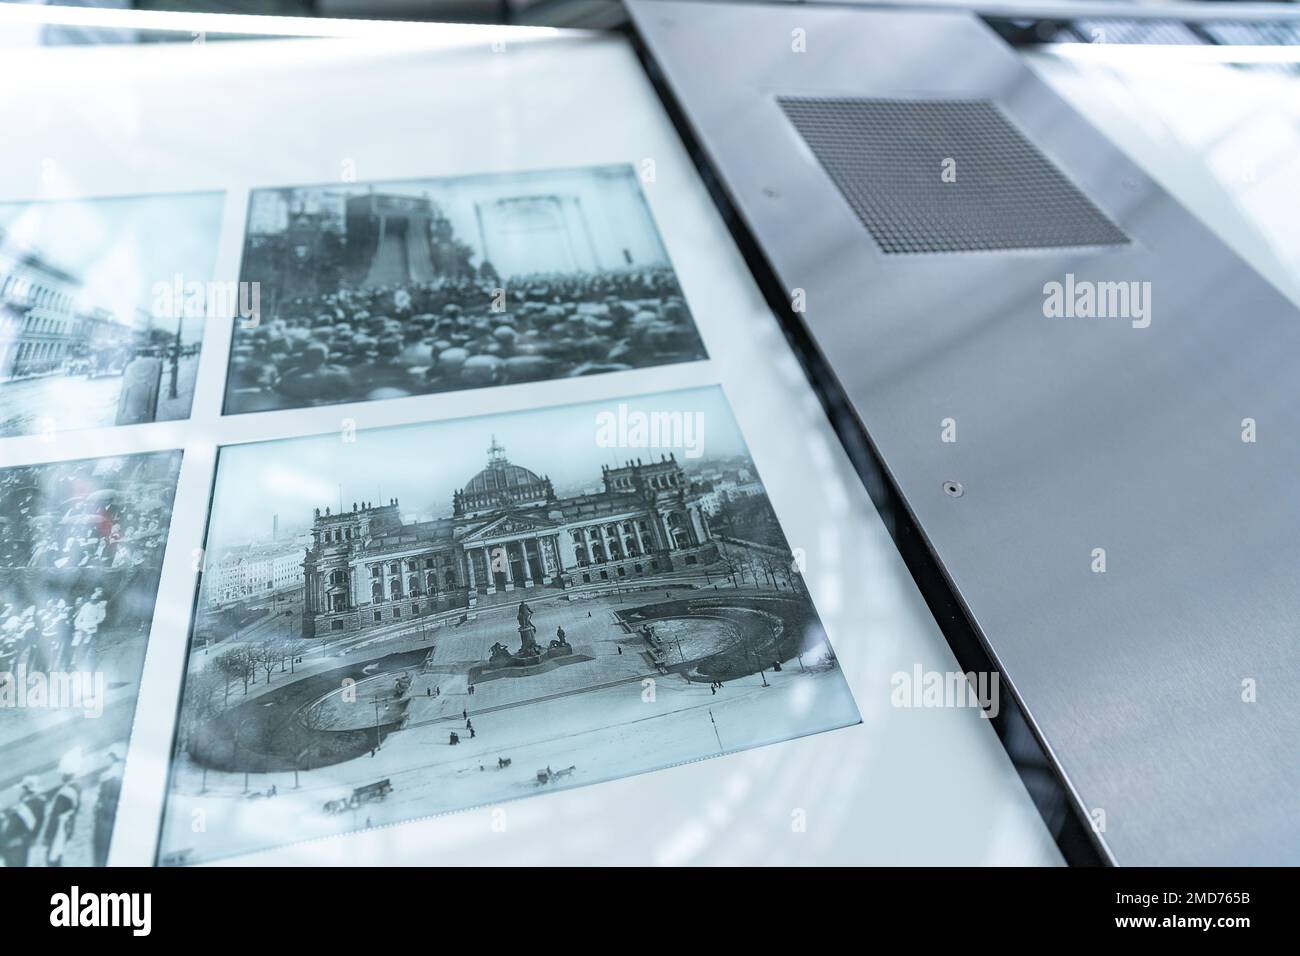 Inside Bundestag dome. Reichstag building in Berlin. Old historical photos and newspaper exhibition inside the dome of german parliament. Stock Photo